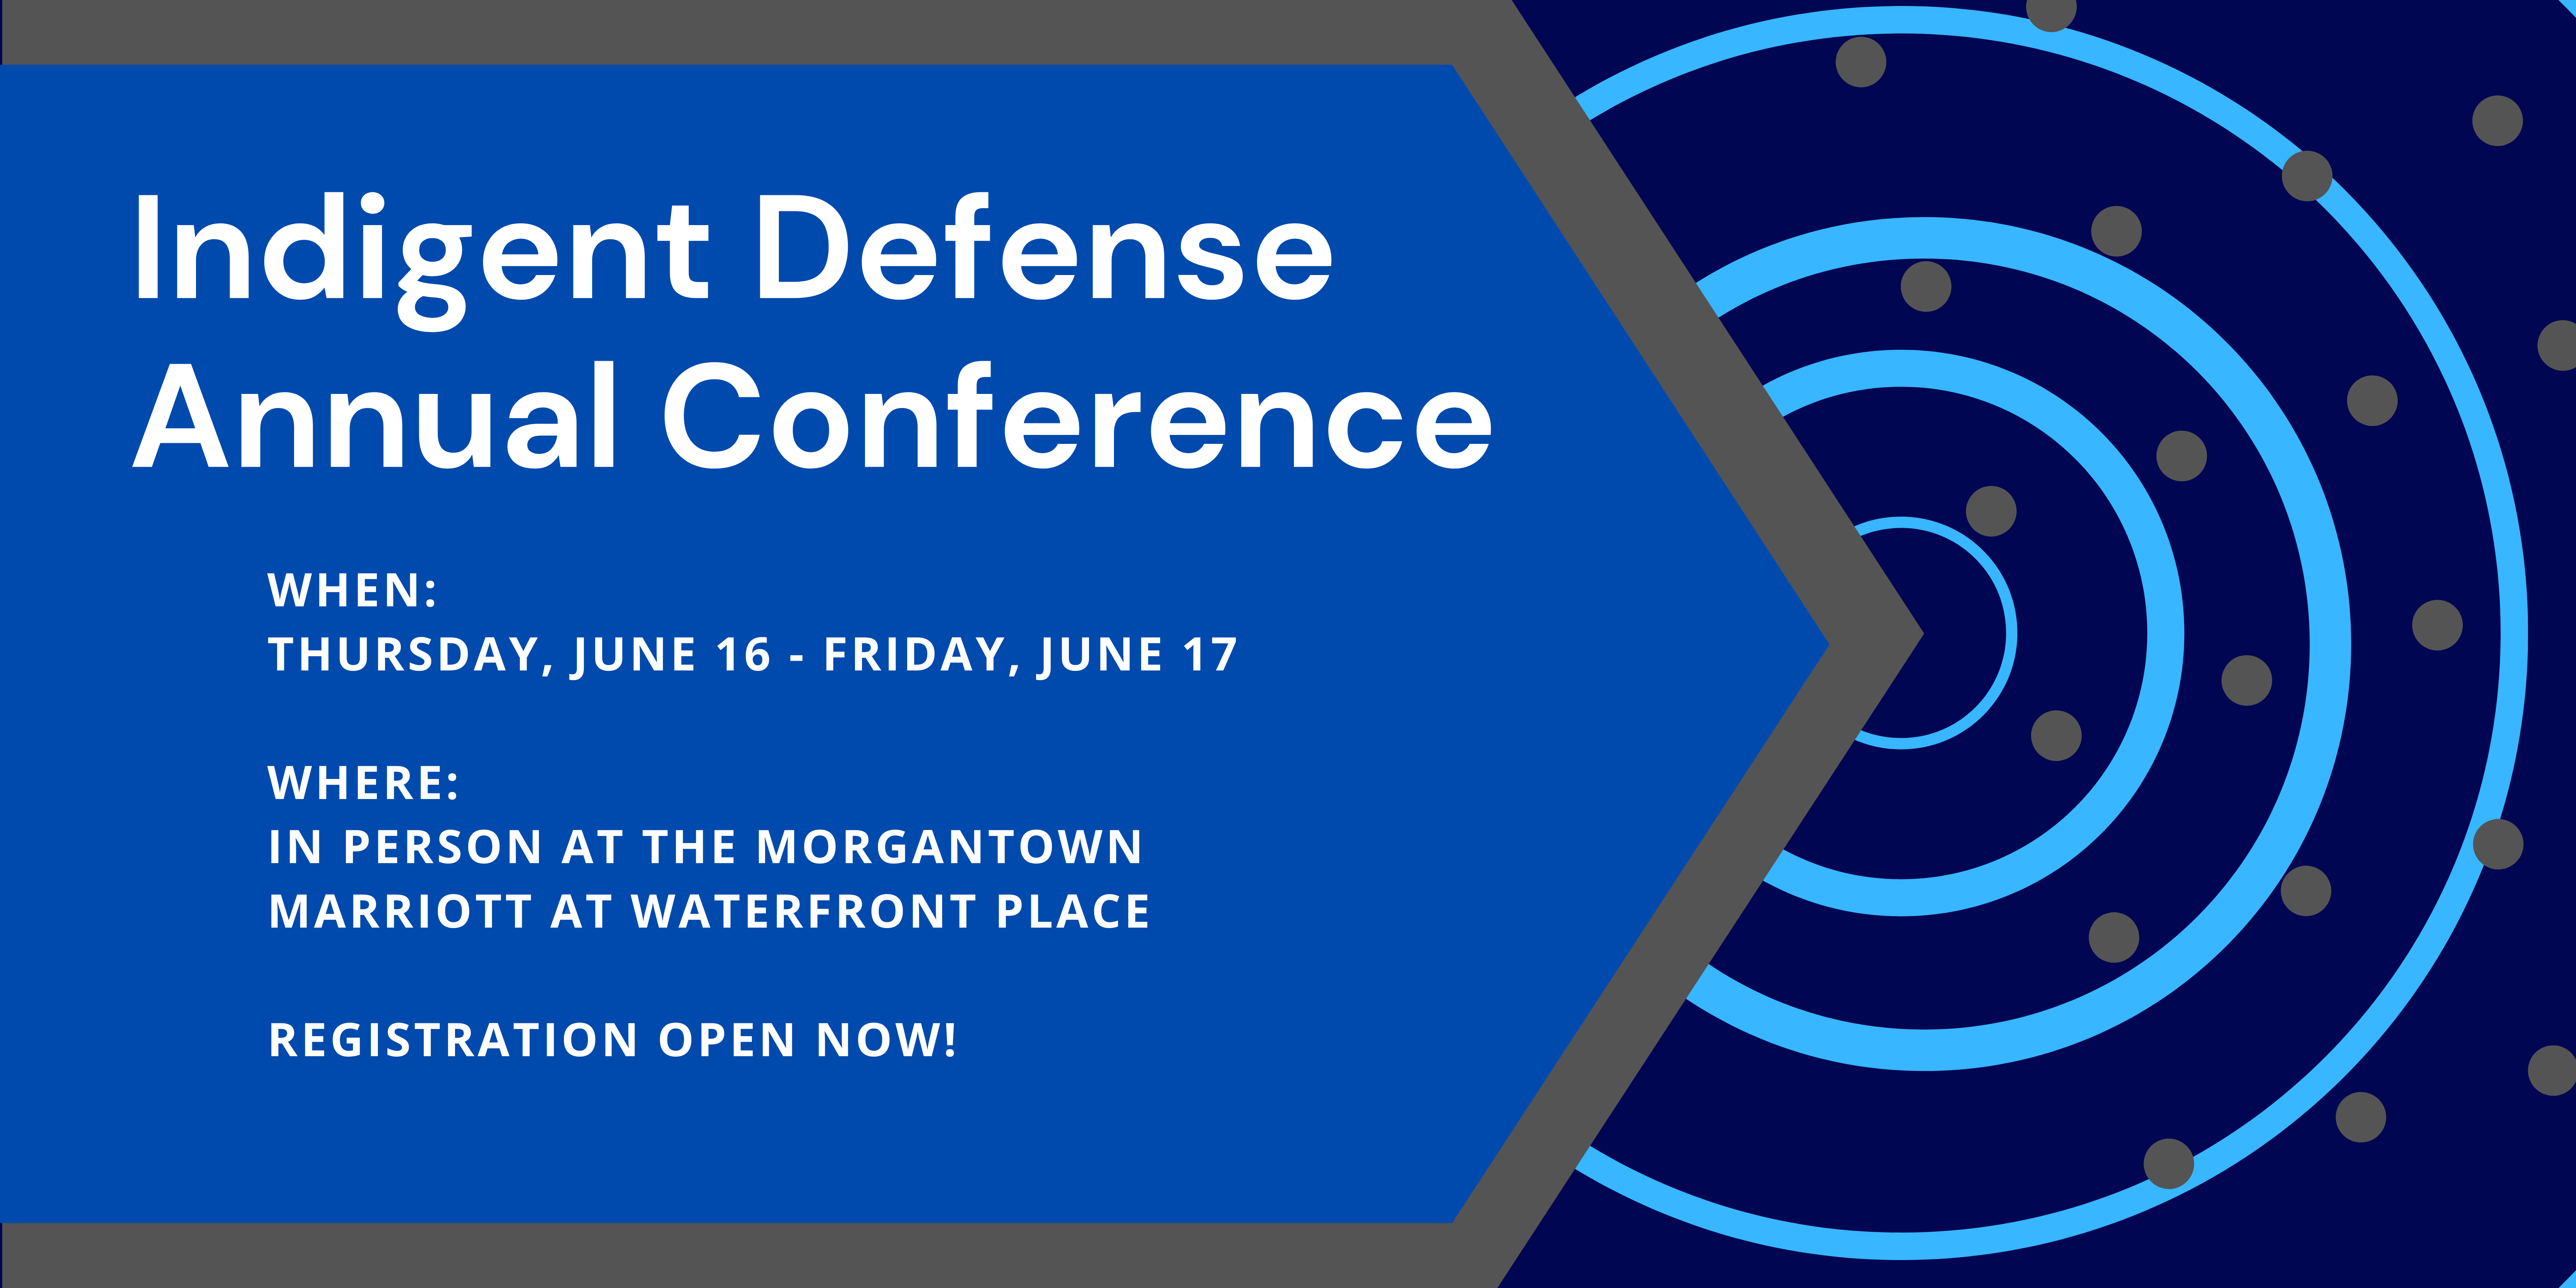 Indigent Defense Annual Conference registration open now!